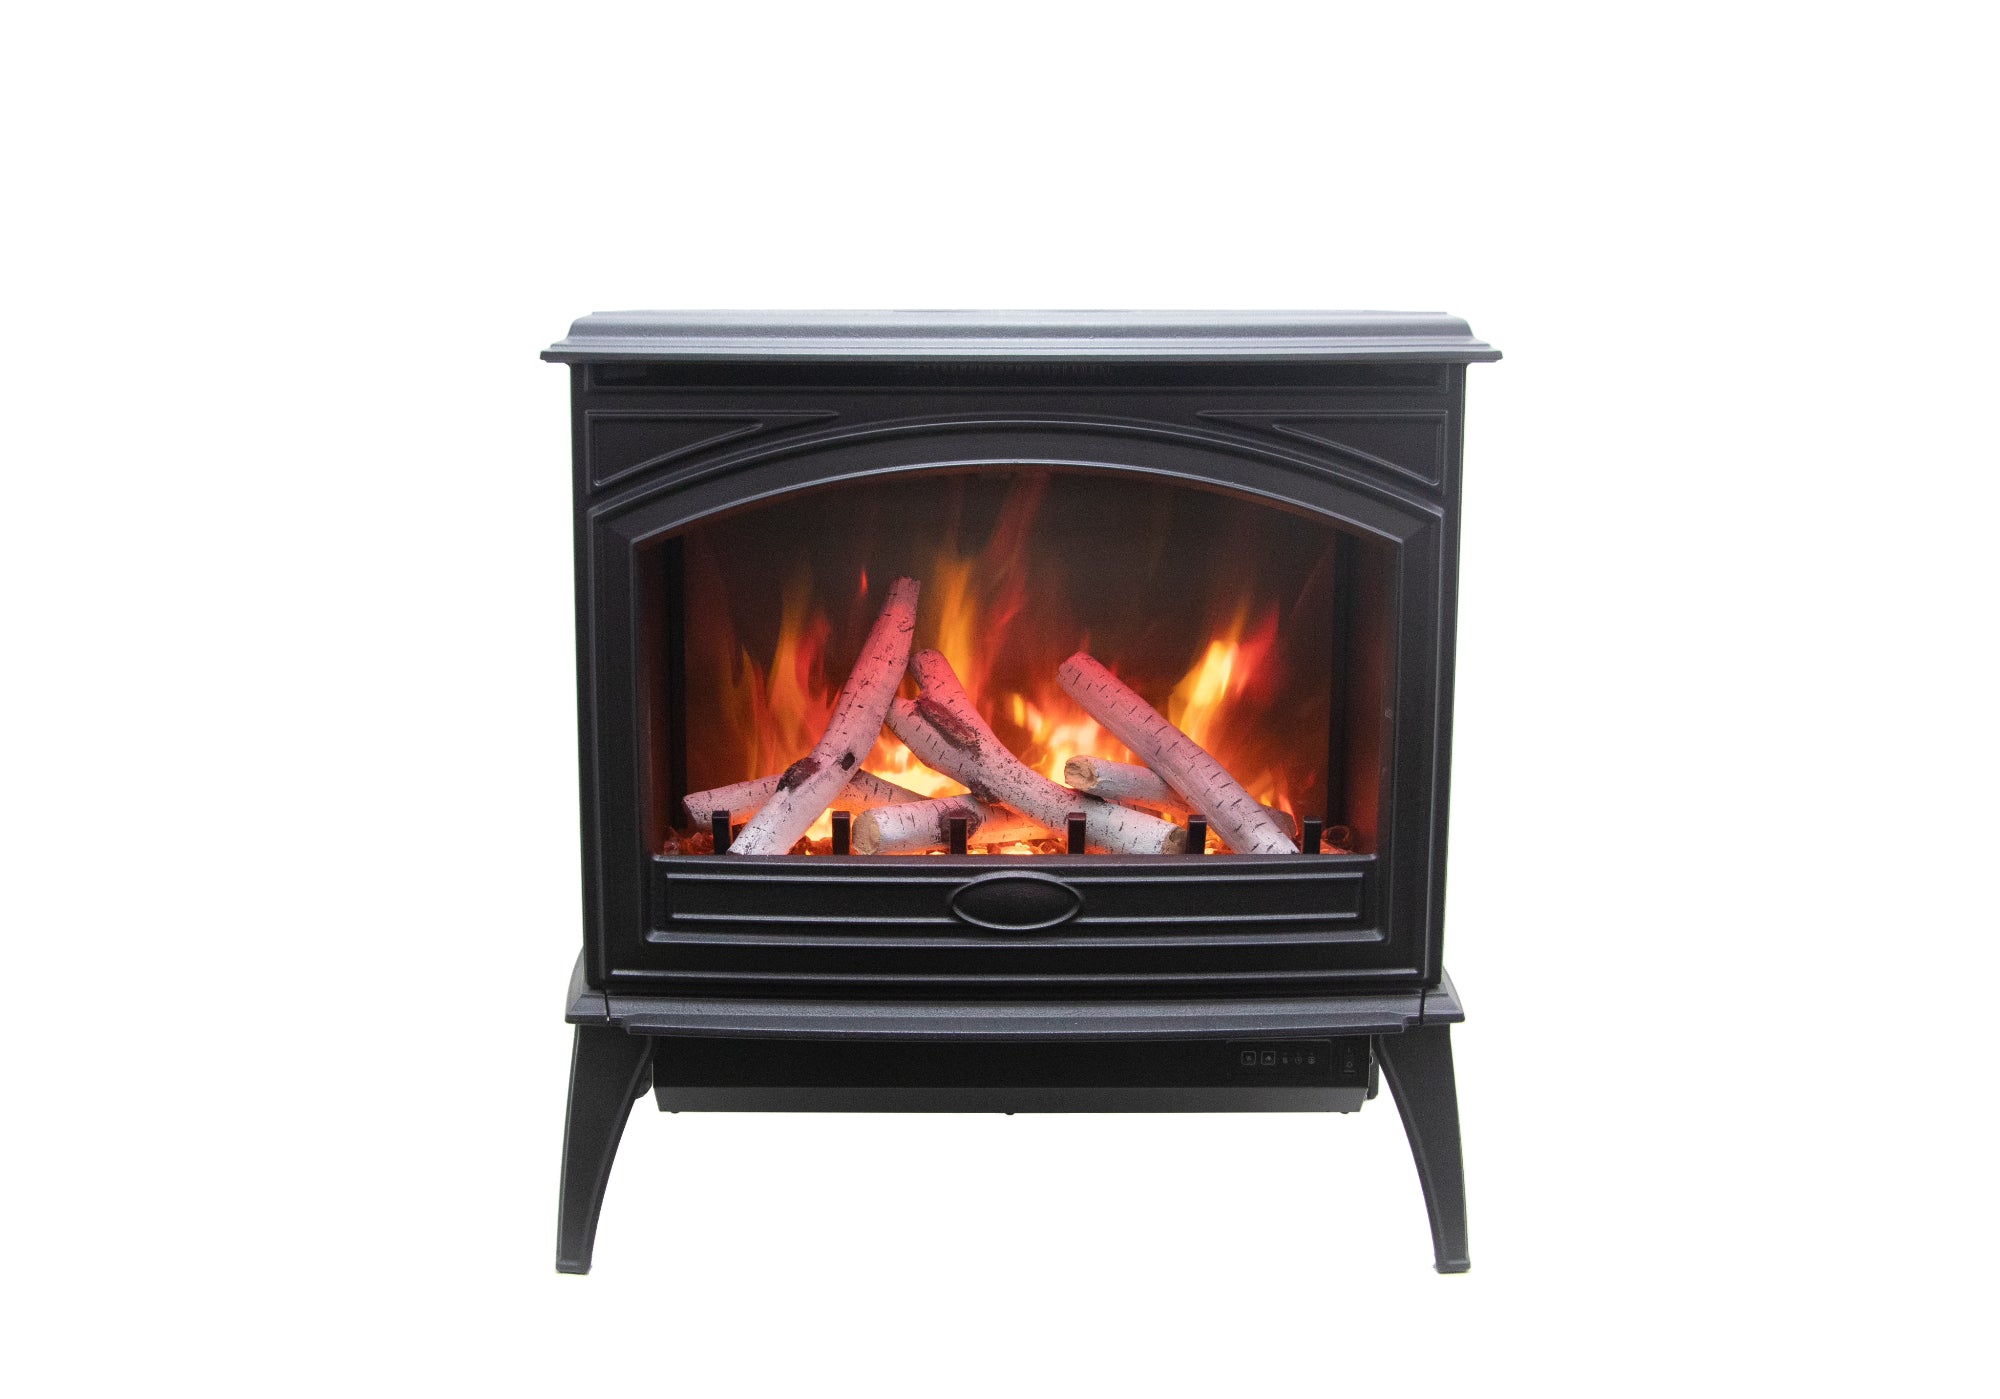 Sierra Flame Cast Iron Freestanding Electric Stove - E70 Birch Yellow and Orange